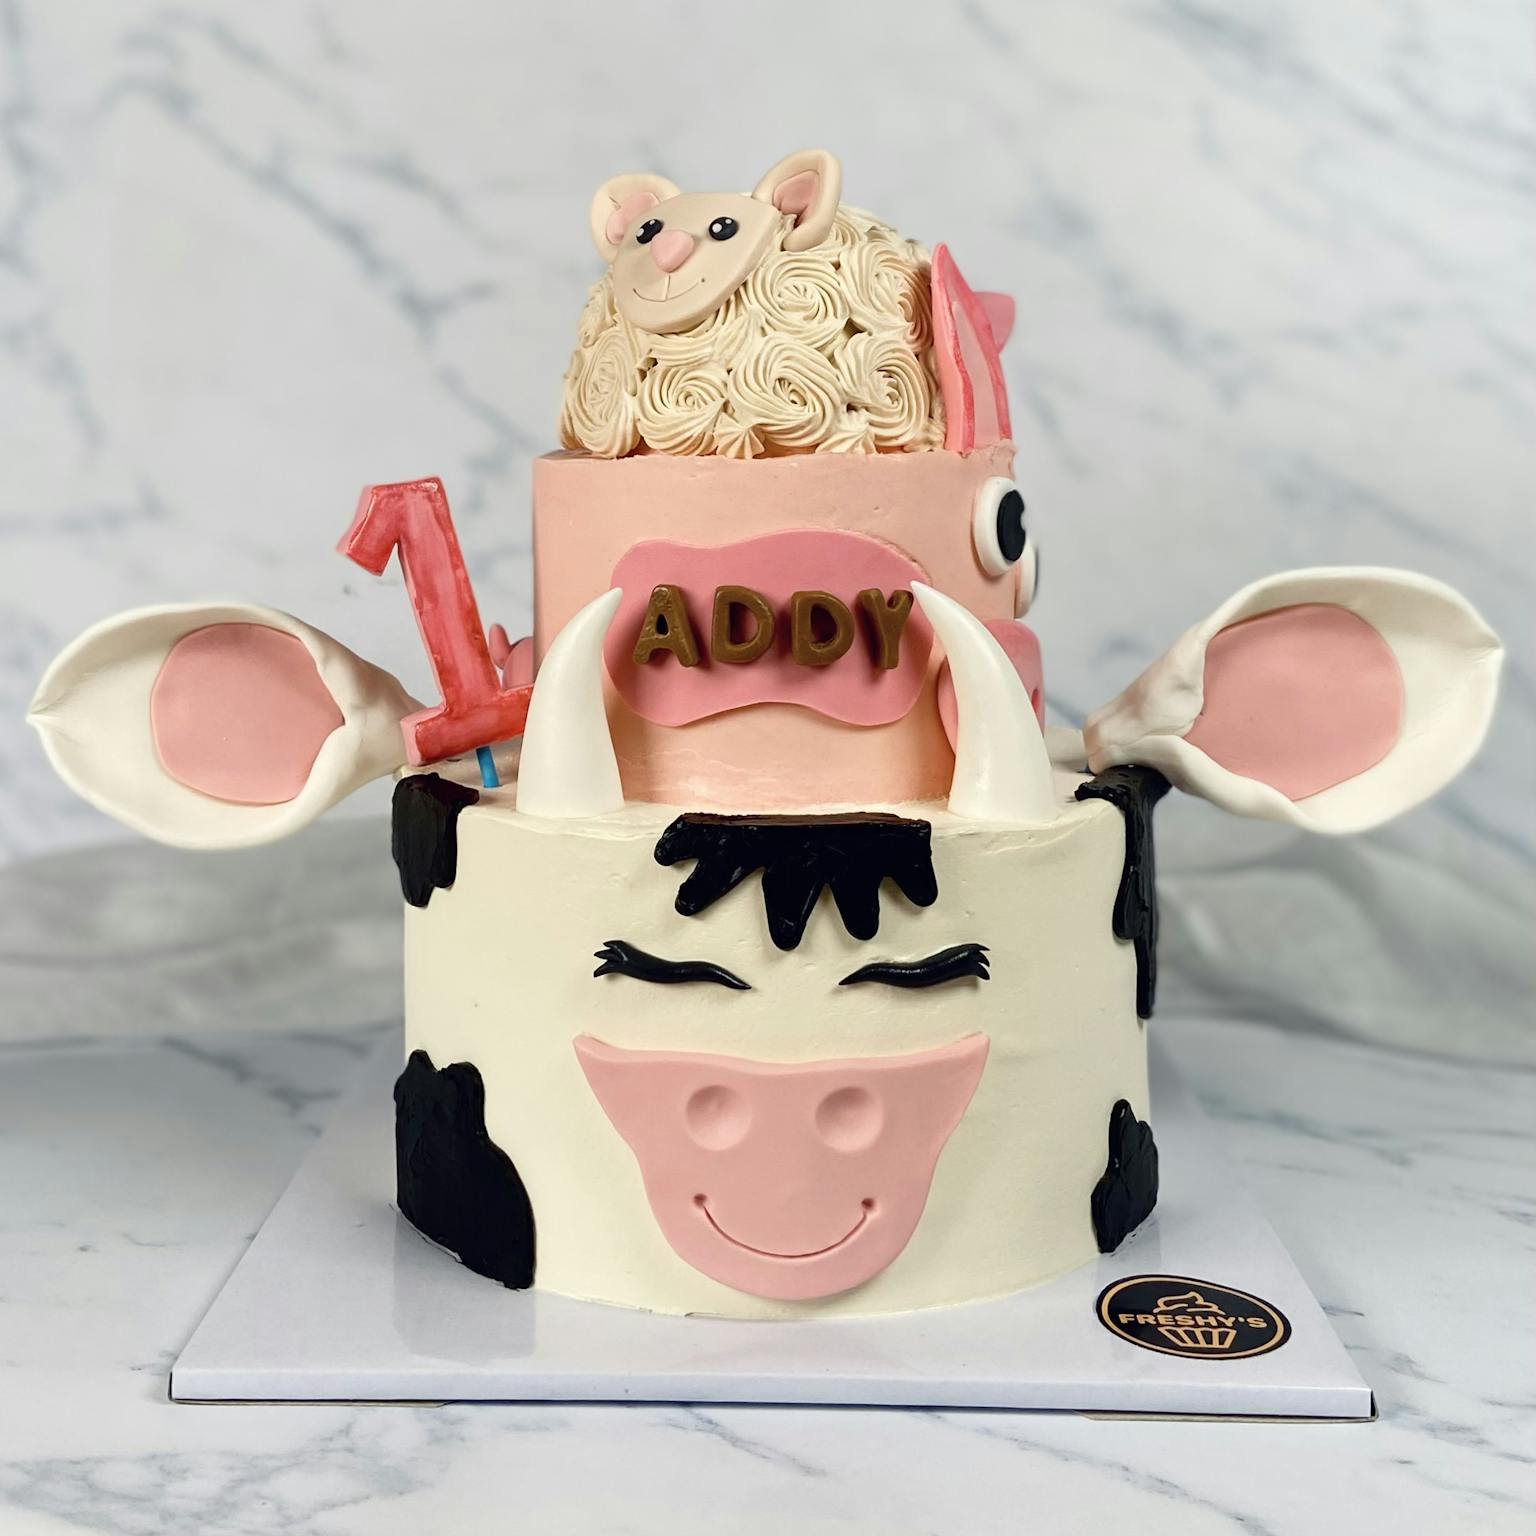 100% edible fondant sculpted cow themed cake